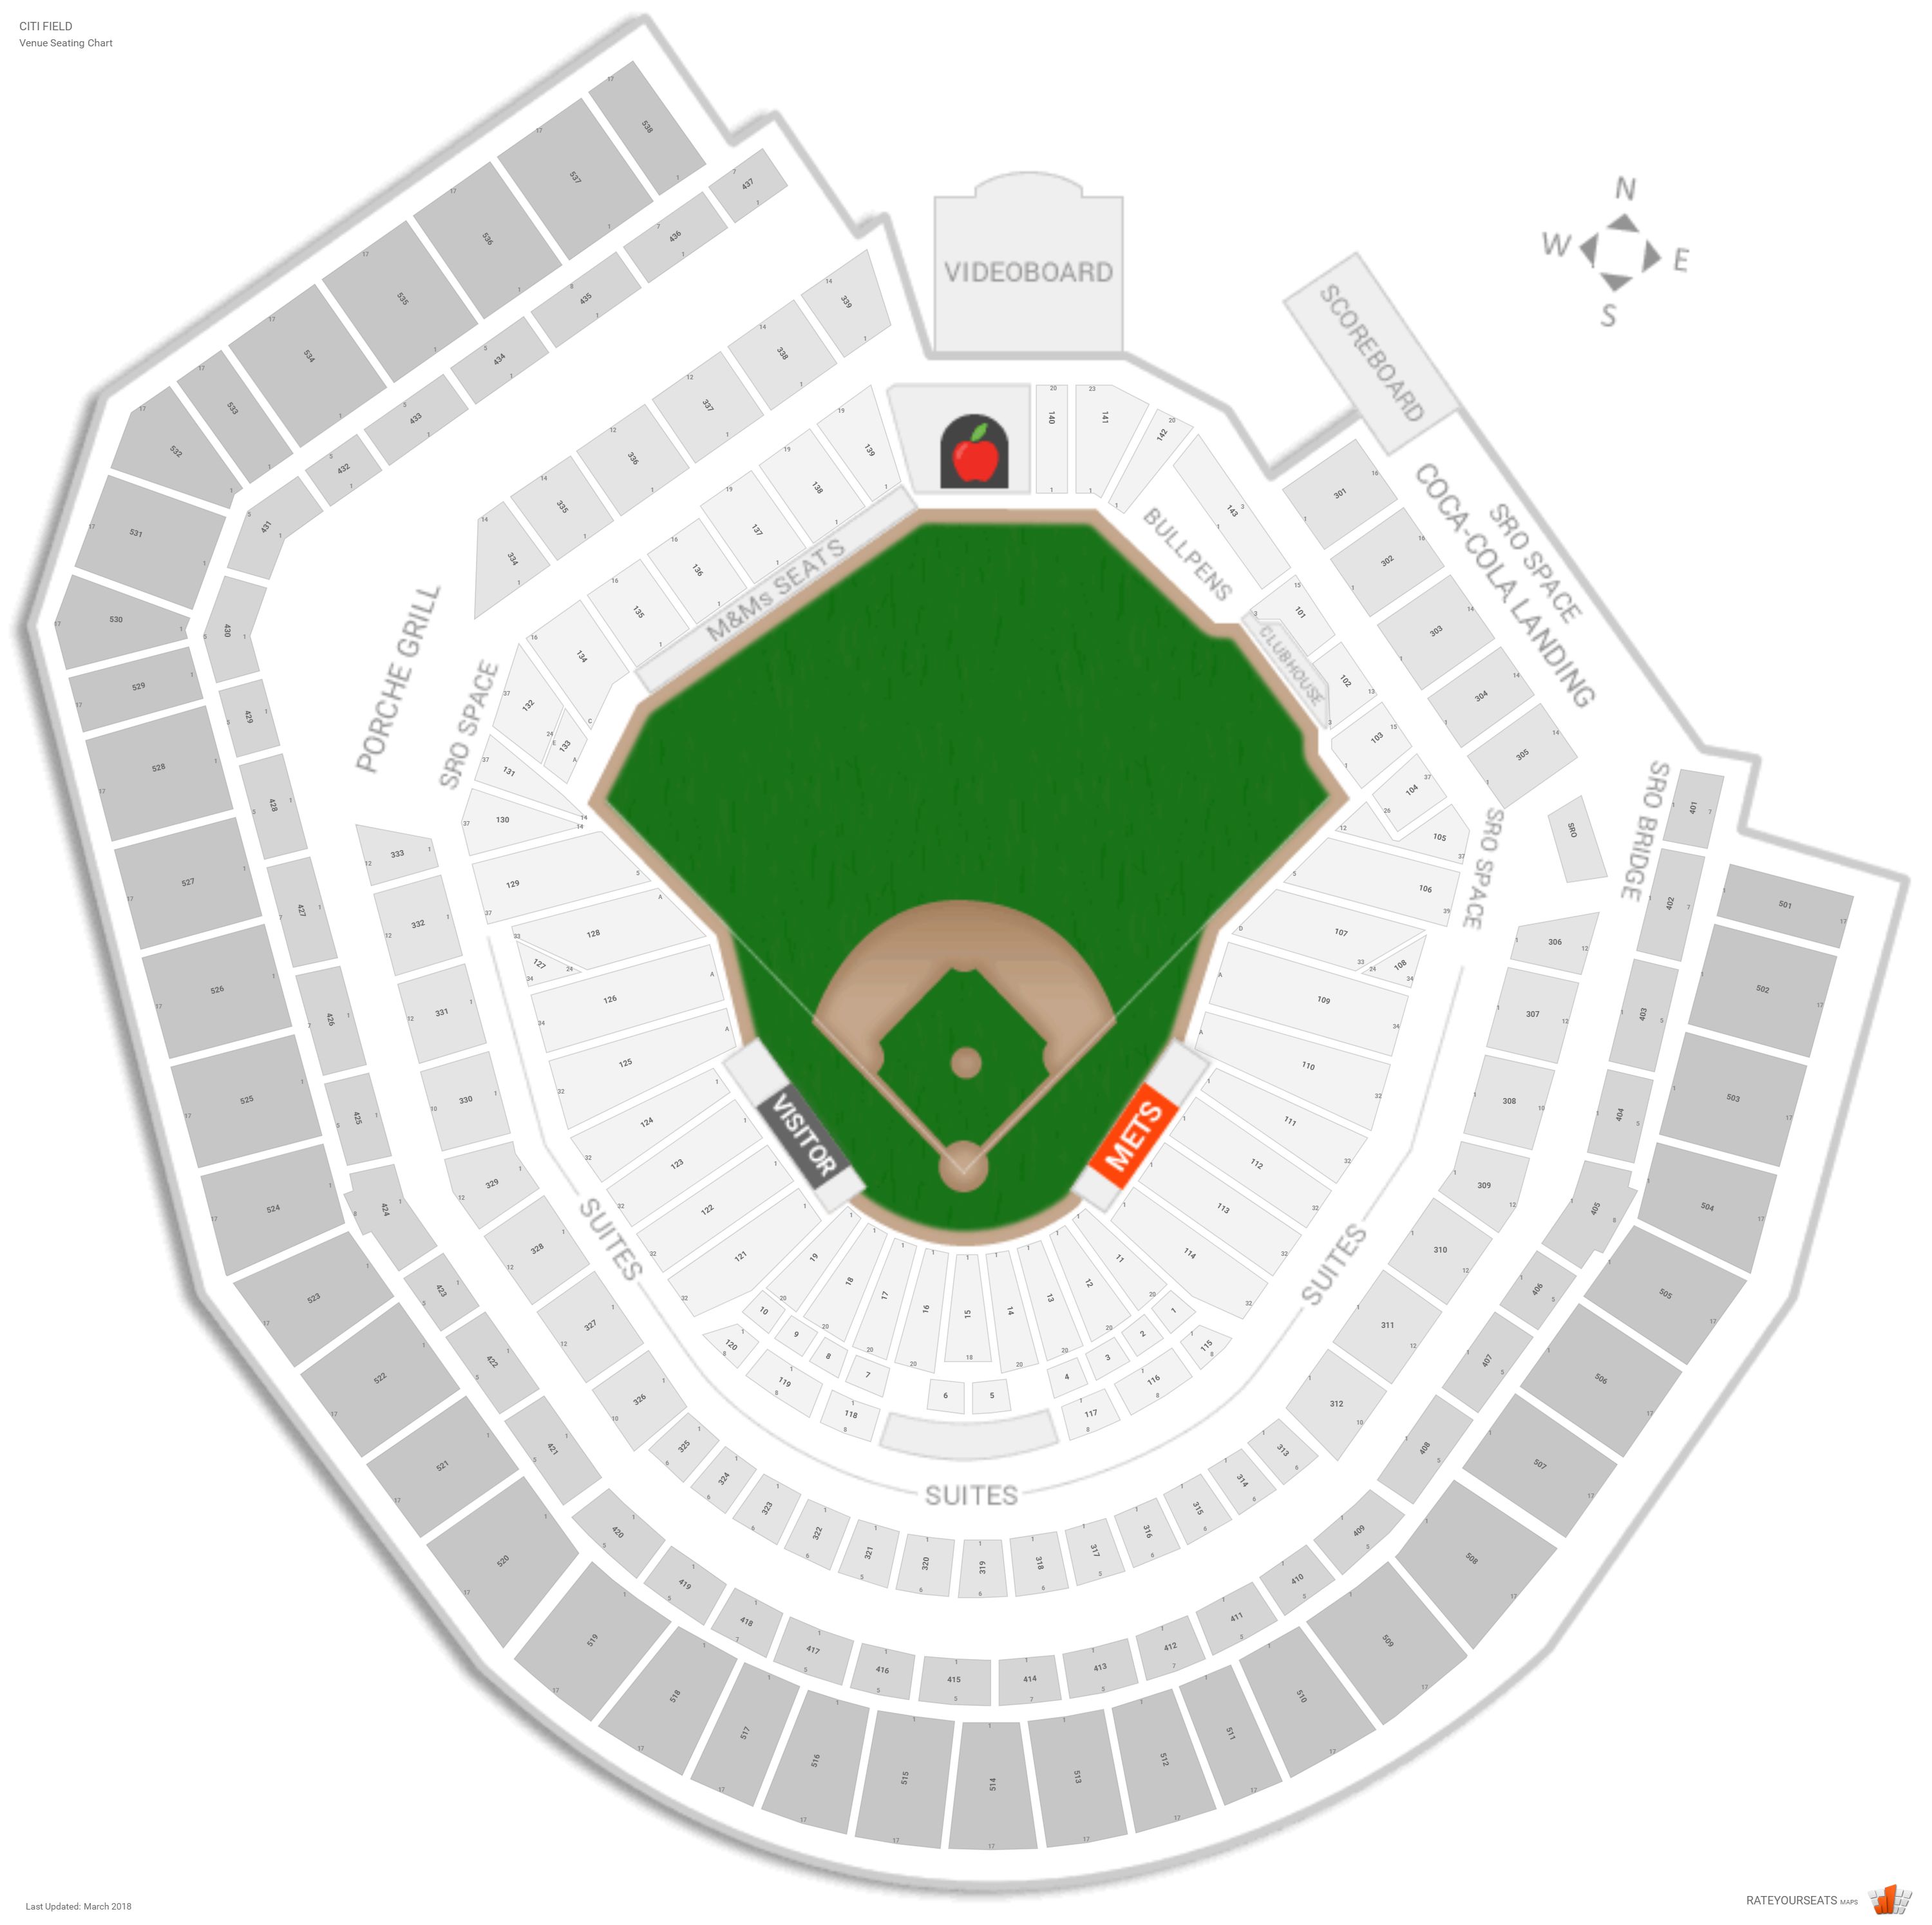 New York Mets Seating Guide - Citi Field - RateYourSeats.com